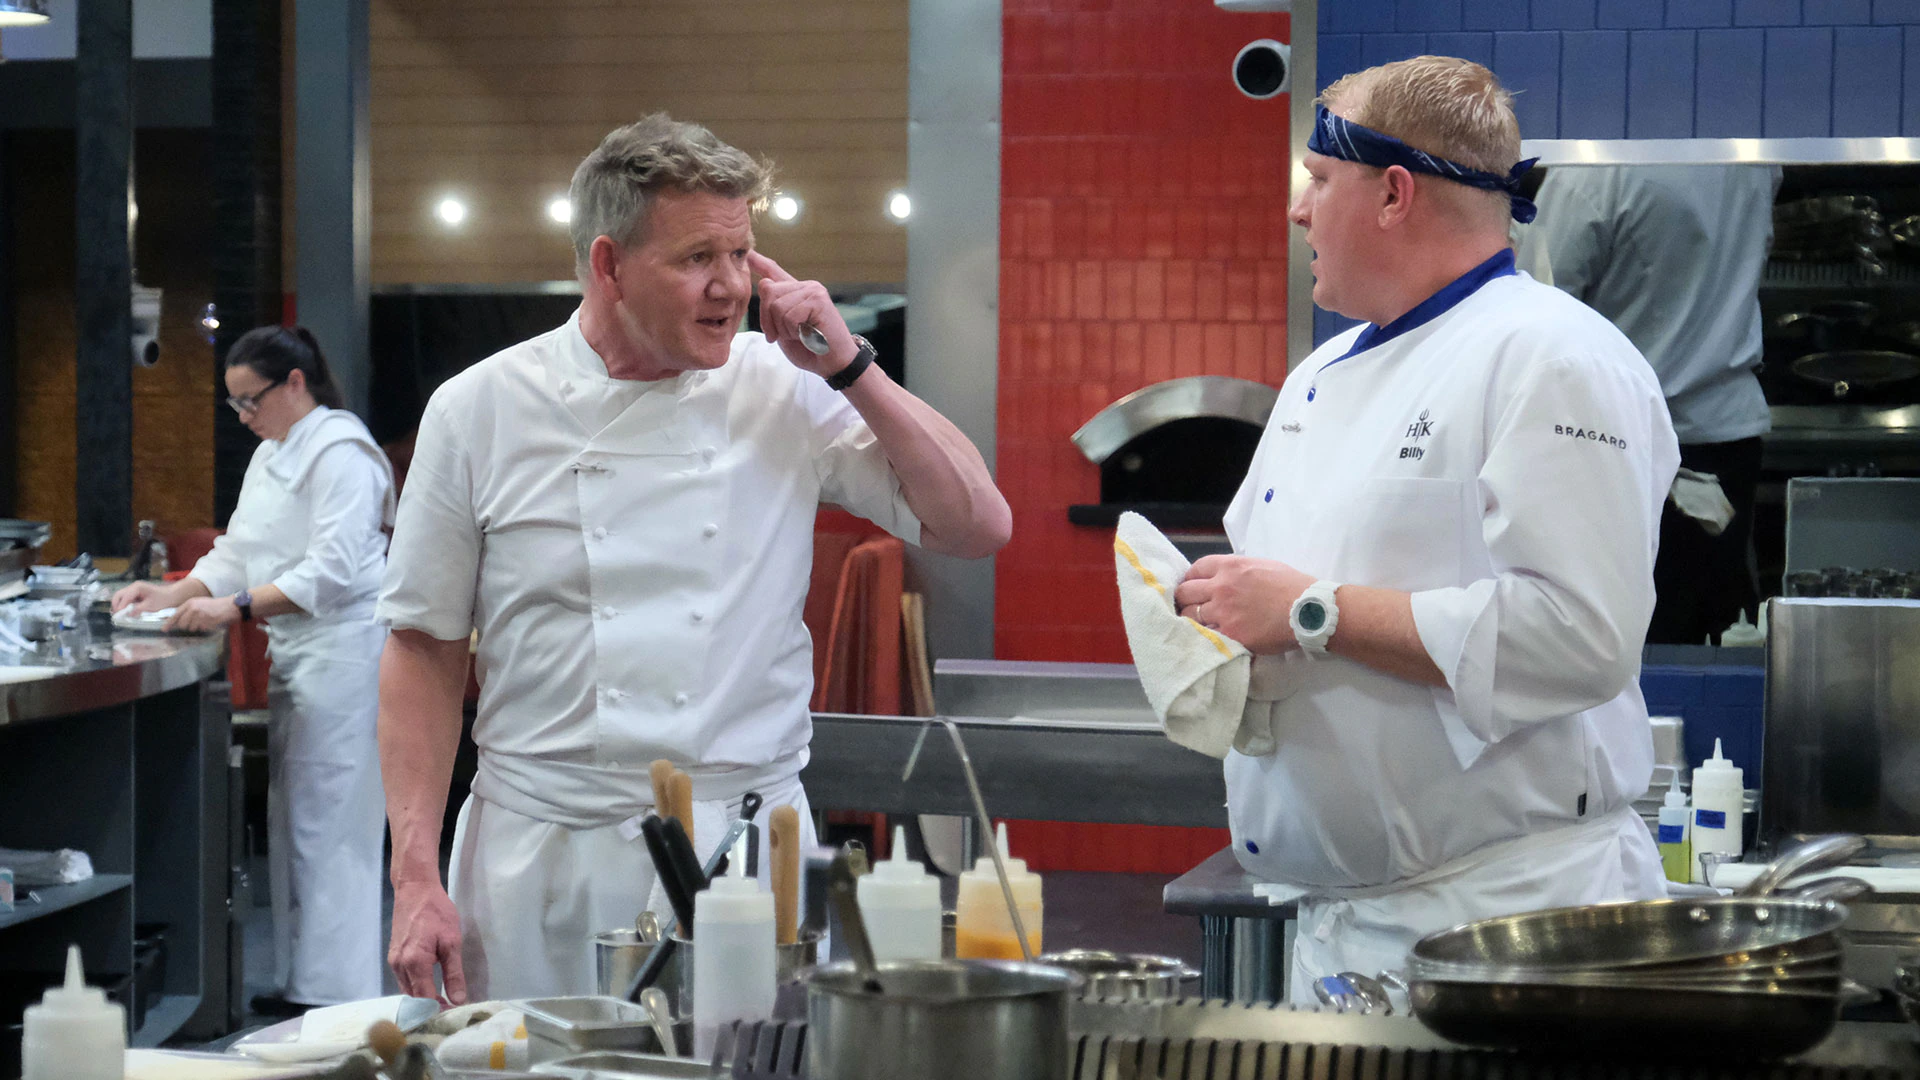 A conflict between the "Oldies and Newbies" will take place on Season 21 of Hell's Kitchen, according to the show's social media accounts.